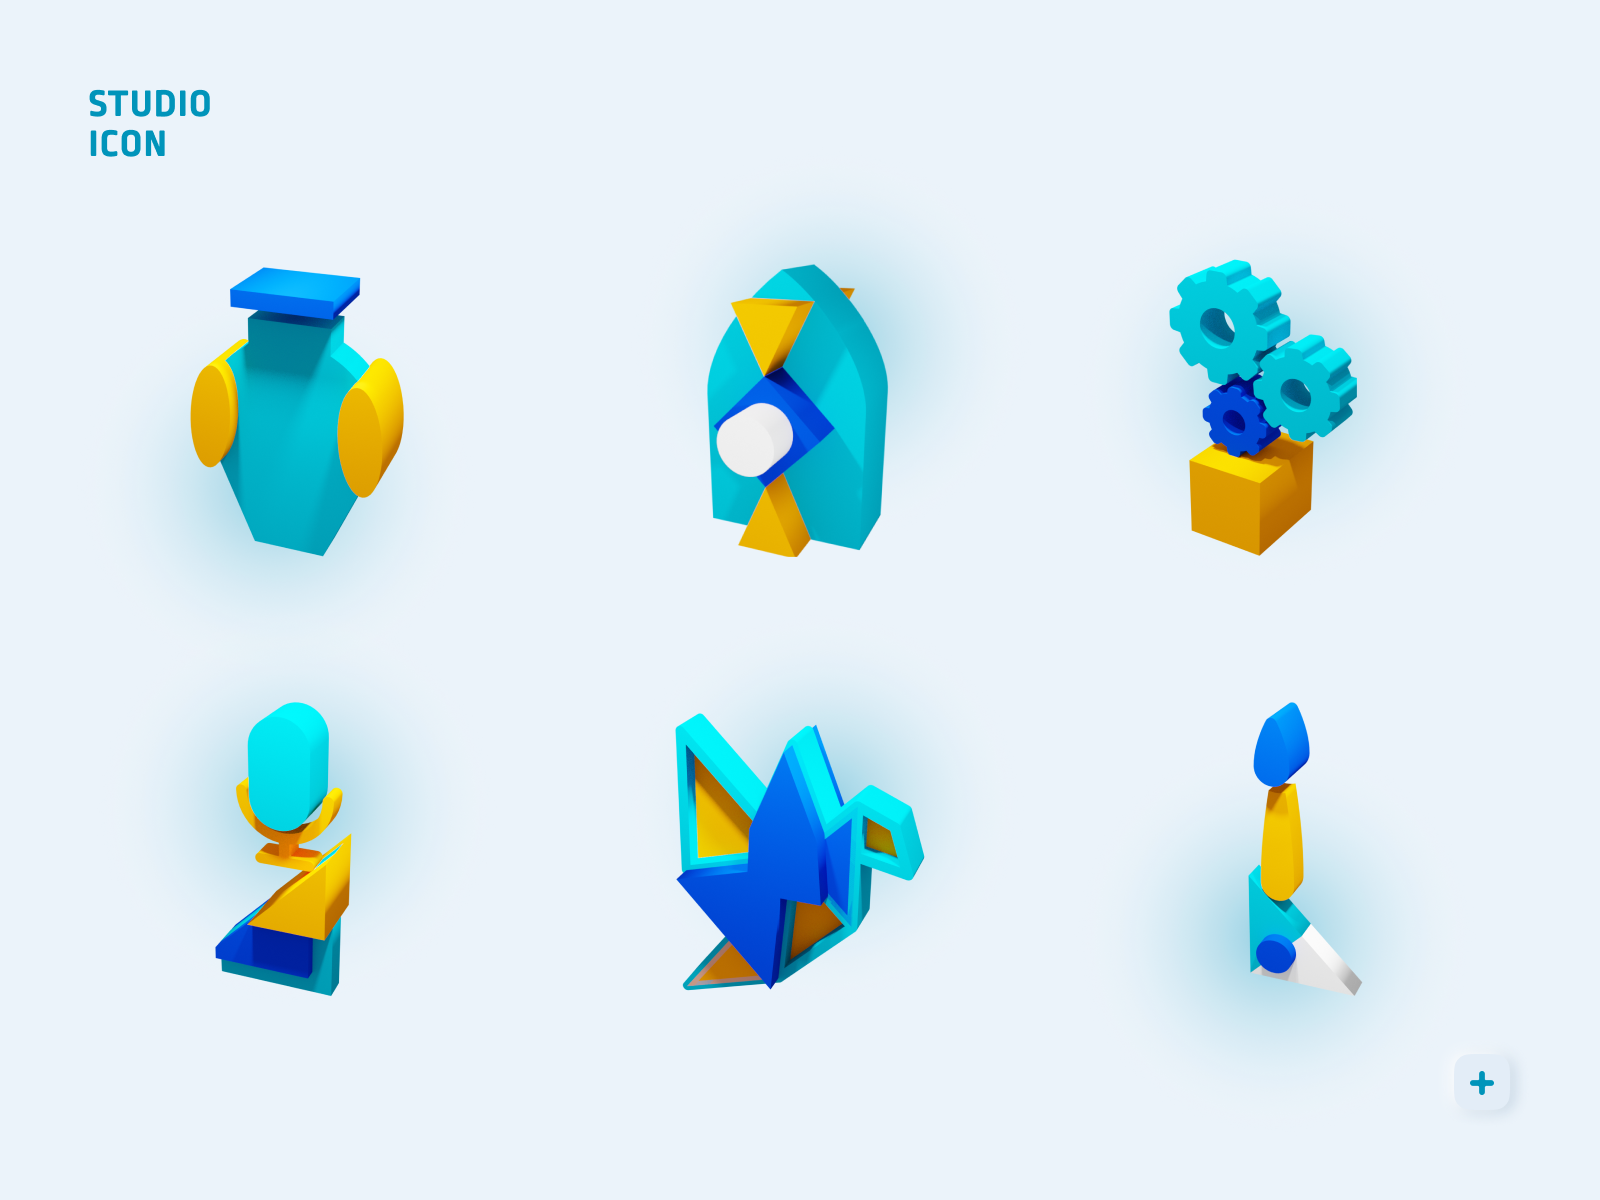 Download Icons For Creative Studios By Anastasia Arestova On Dribbble PSD Mockup Templates